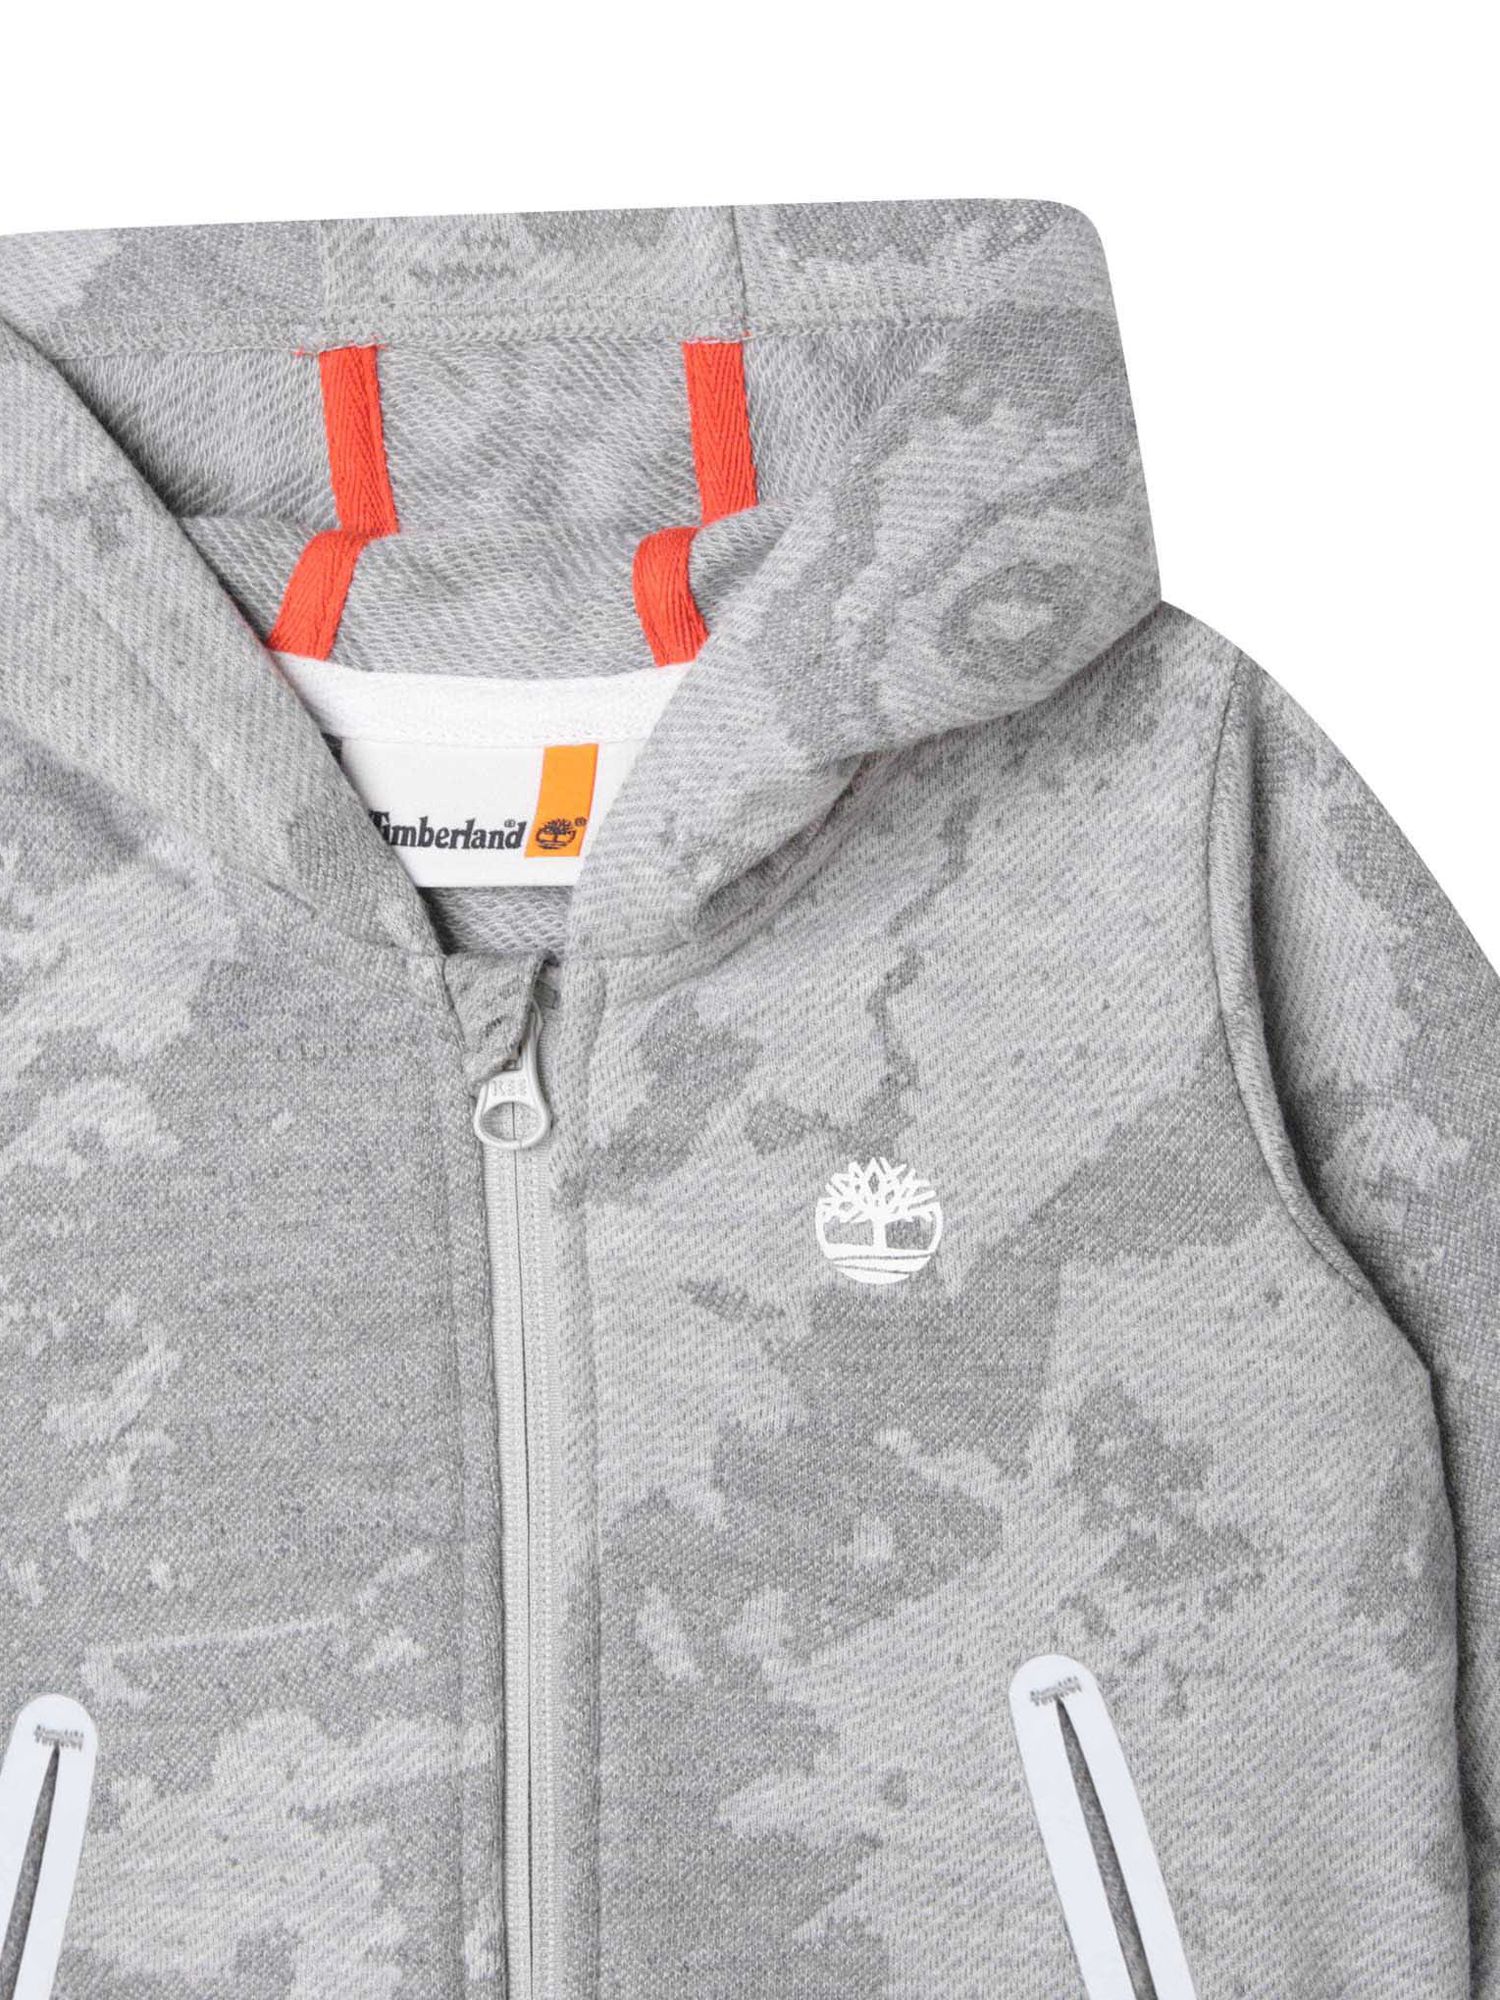 Timberland Baby Camouflage Zipped Hoodie, Light Grey, 9 months